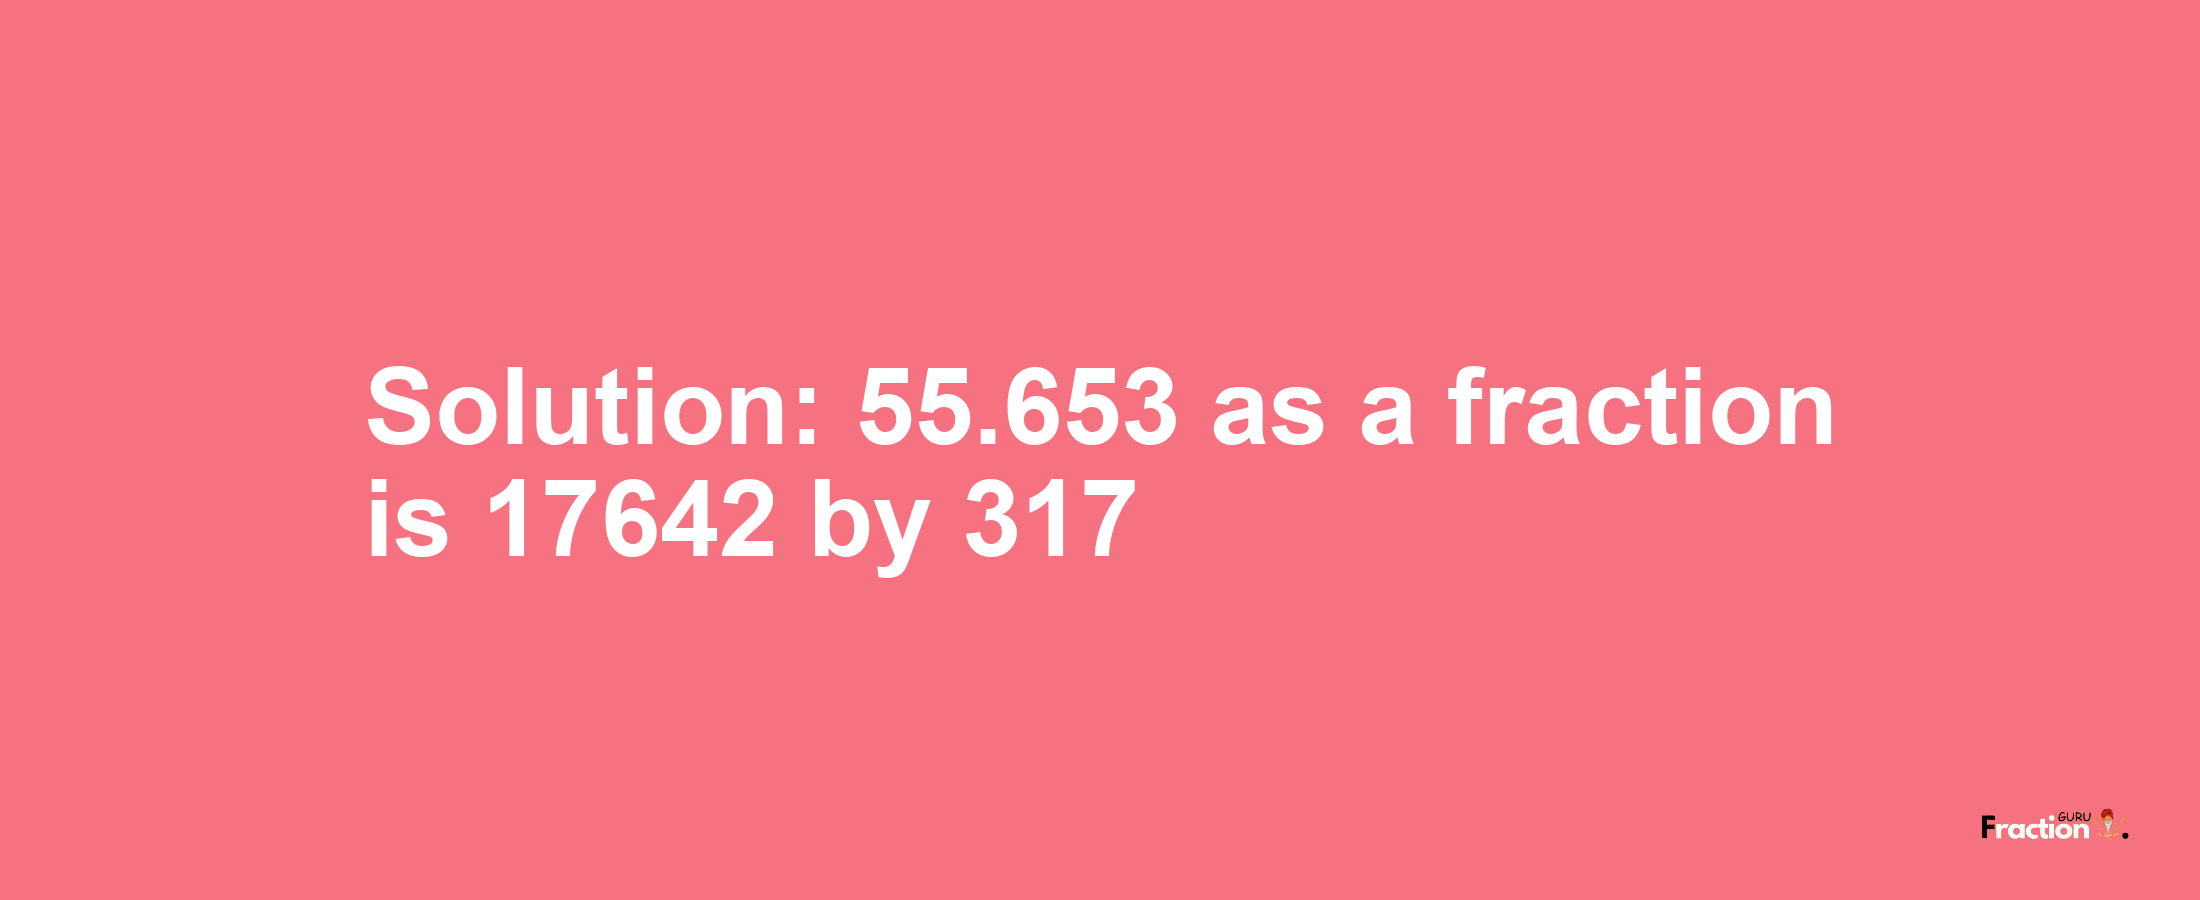 Solution:55.653 as a fraction is 17642/317